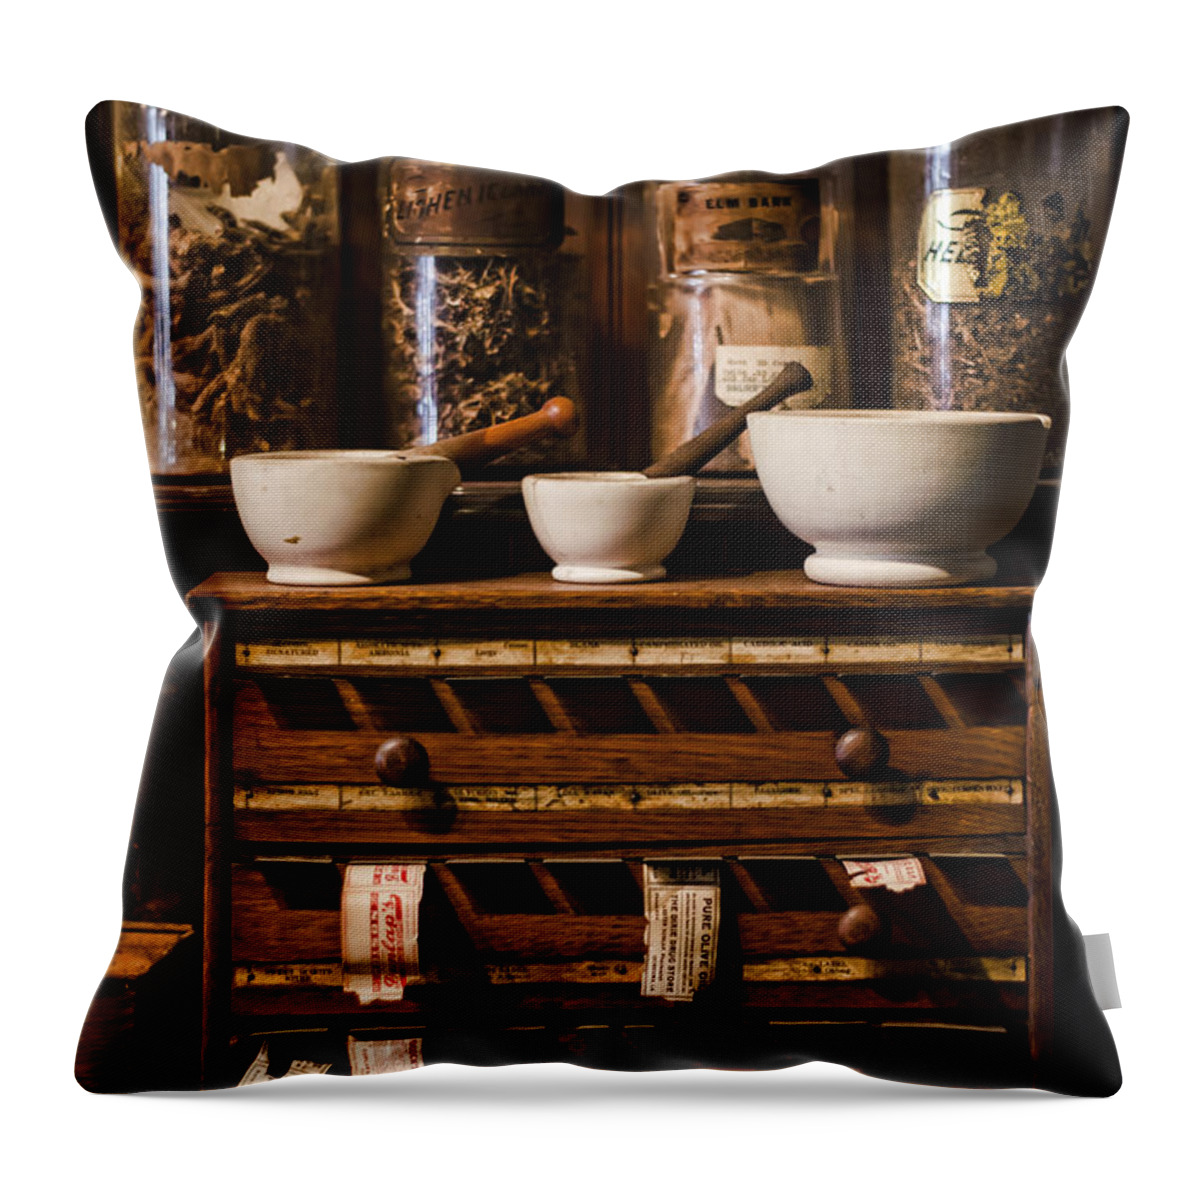 Pharmacy Throw Pillow featuring the photograph Making Potions by Heather Applegate